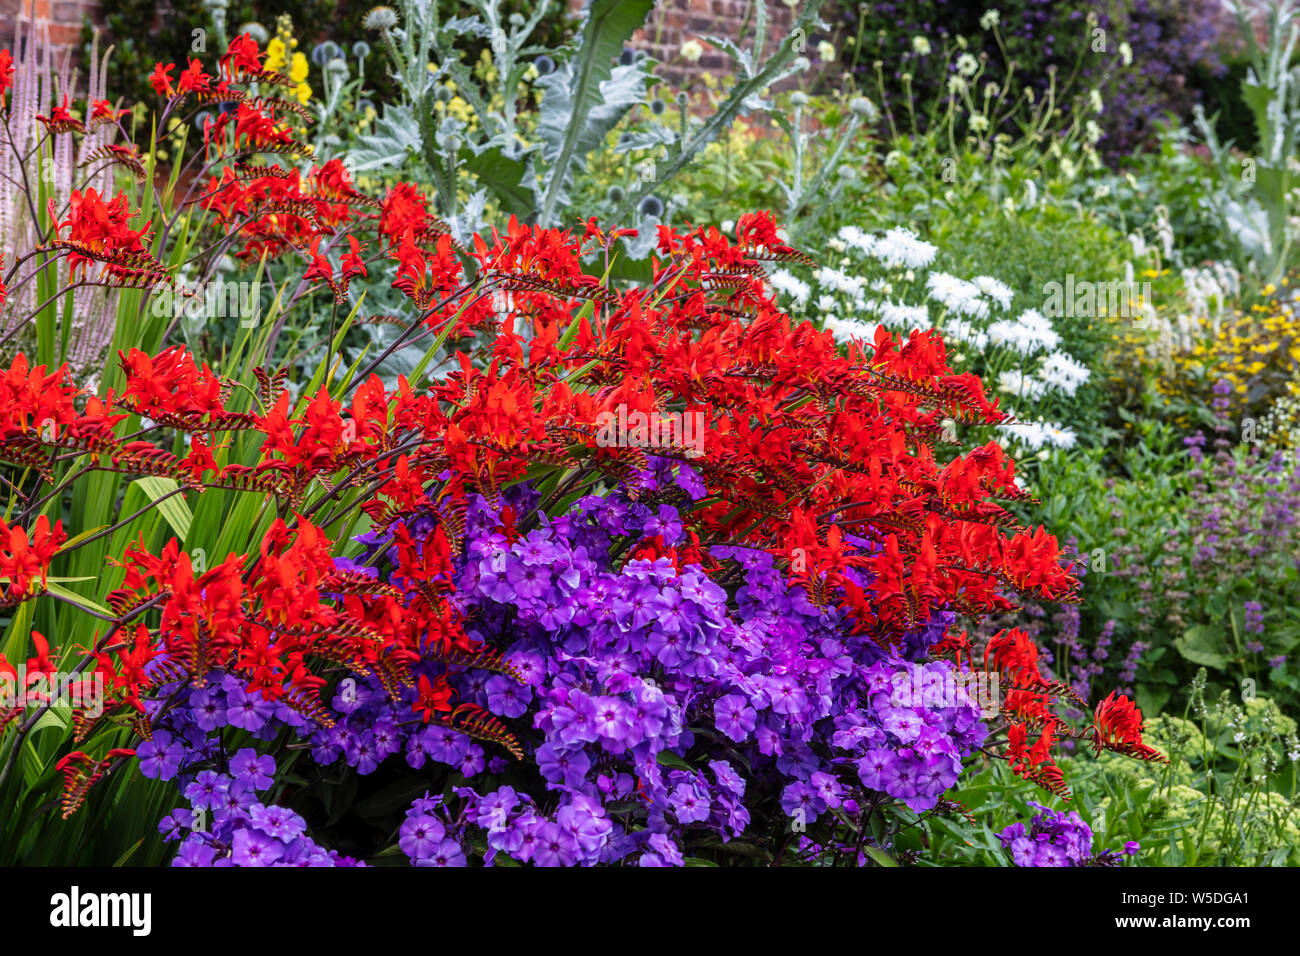 Deep red Crocosmia and purple Phlox flowering plants in a garden herbaceous border. Stock Photo